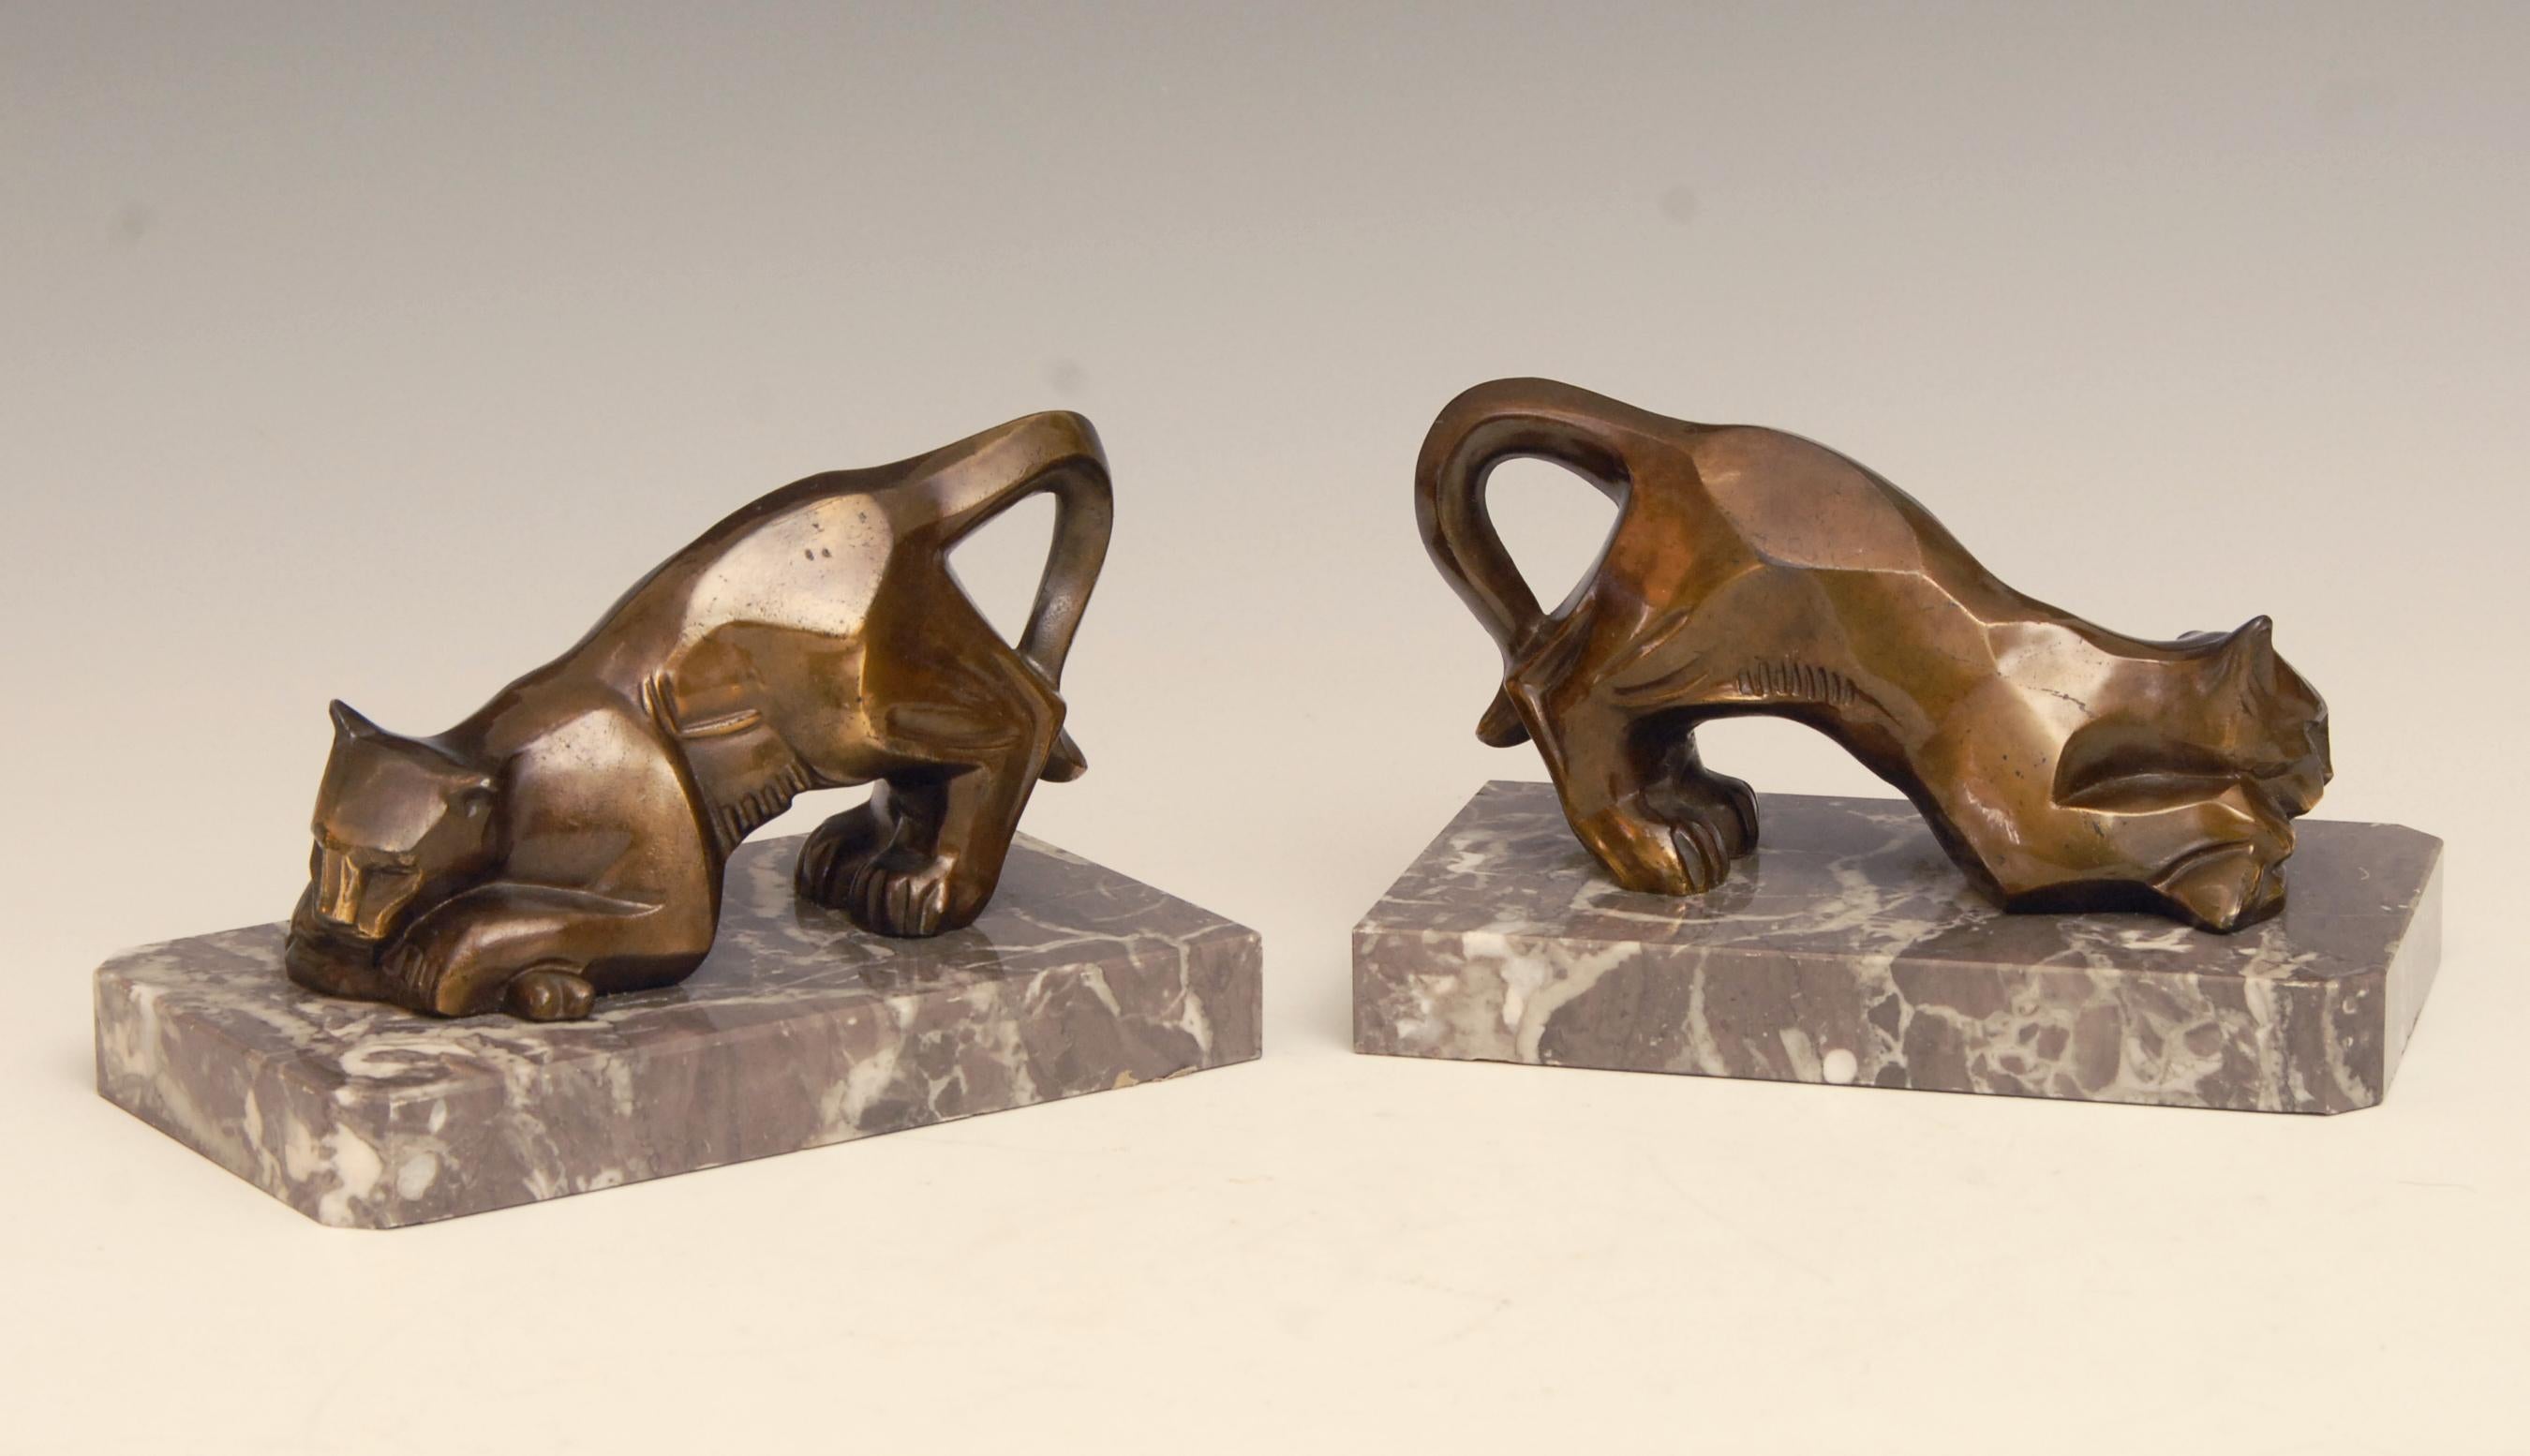 Superb pair of French Art Deco cubist bronze panther bookends on grey marble bases.
Original 1930s, i can add new green felt to the bottoms if required.
Very heavy, weighing about 4 lbs each.

Price includes free shipping to anywhere in the